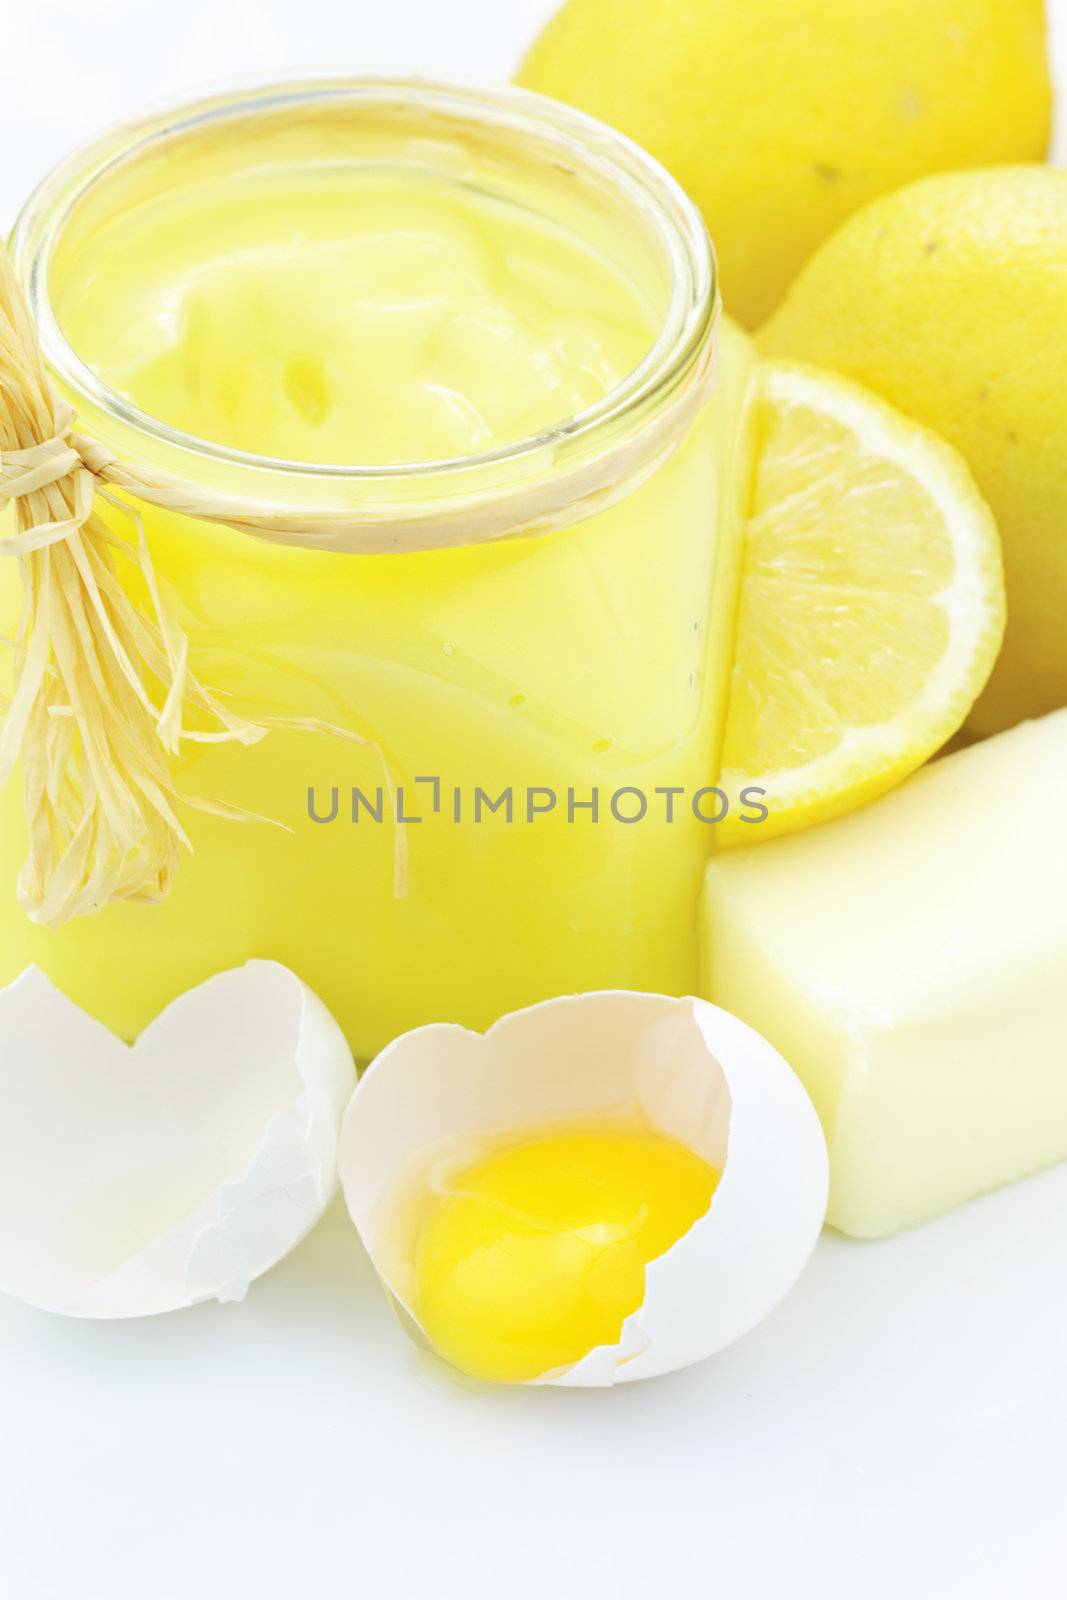 Ingredients for Lemon Curd by StephanieFrey